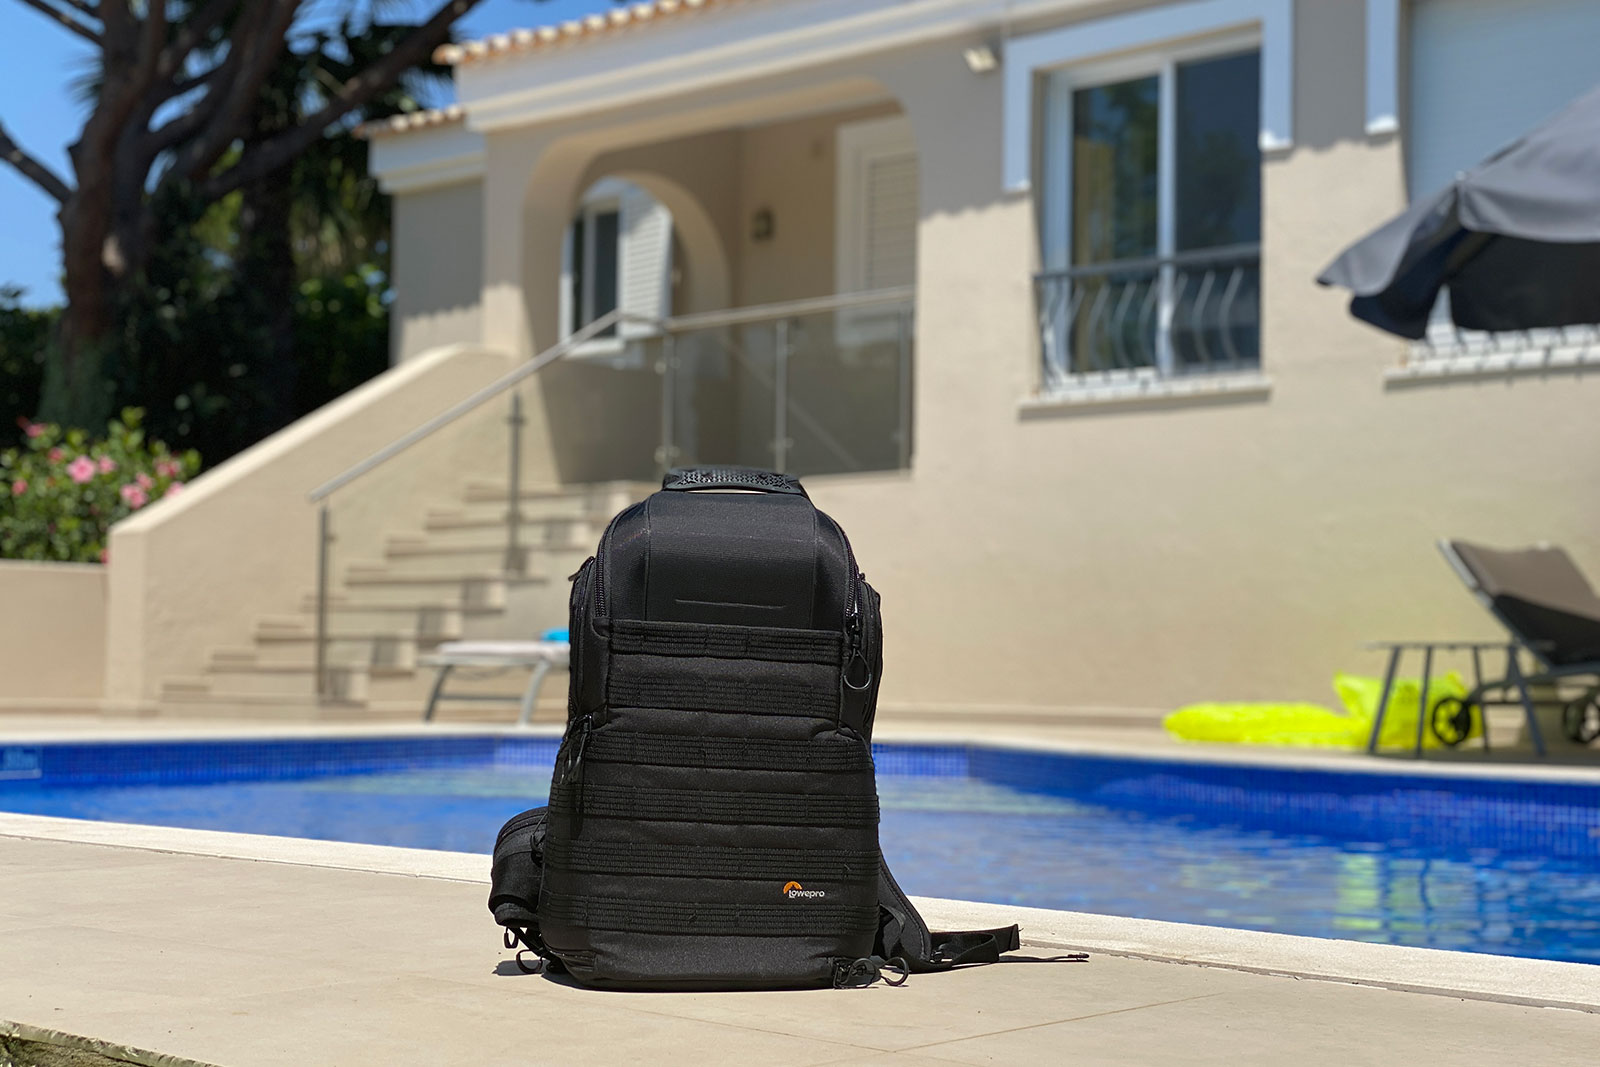 A small black backpack in front of a pool. The best backpack for travelling